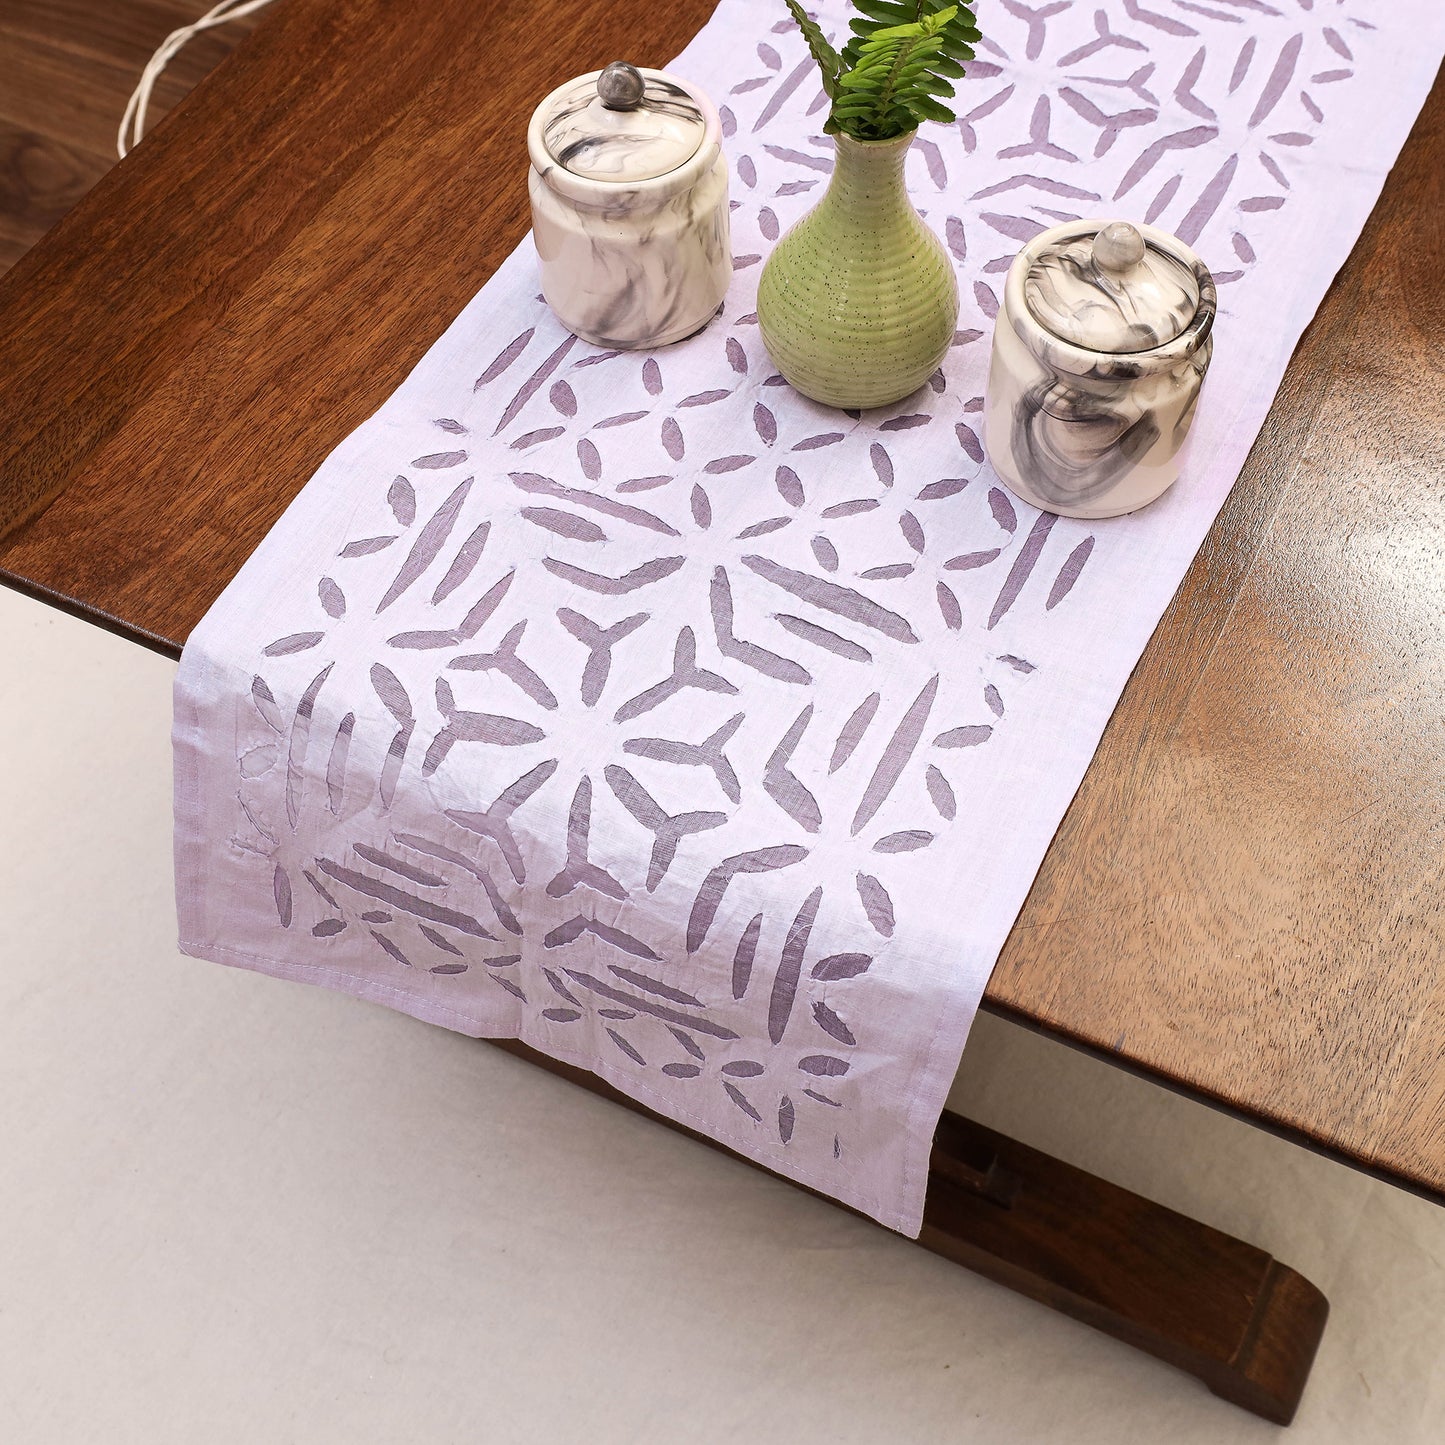 Applique Cut work Cotton Table Runner (47 x 12.5 in)